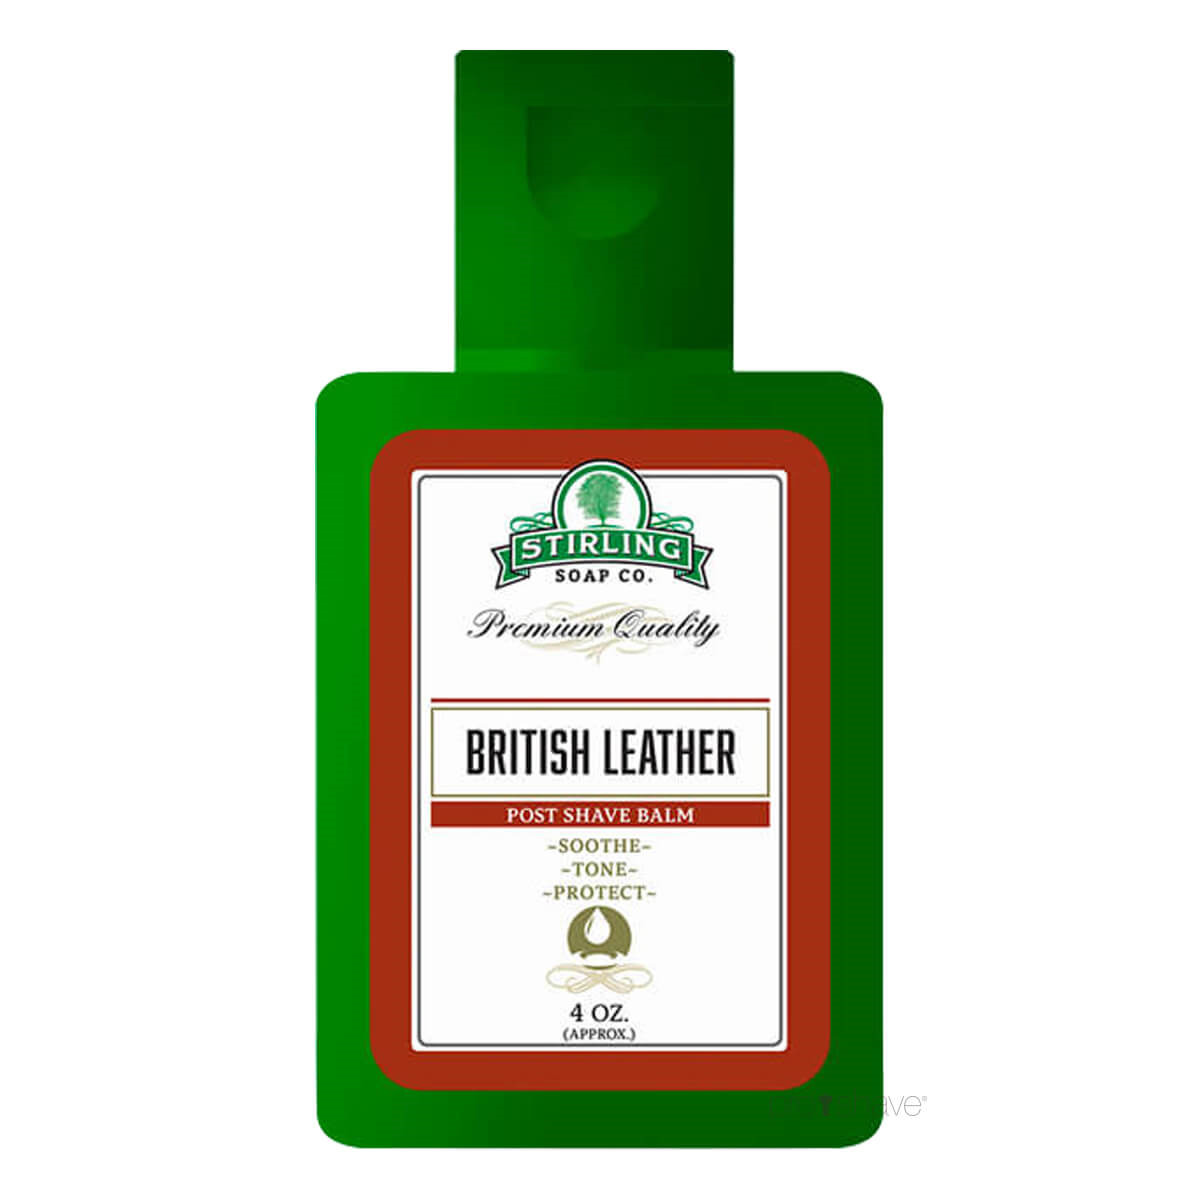 Stirling Soap Co. Aftershave Balm, British Leather, 118 ml.